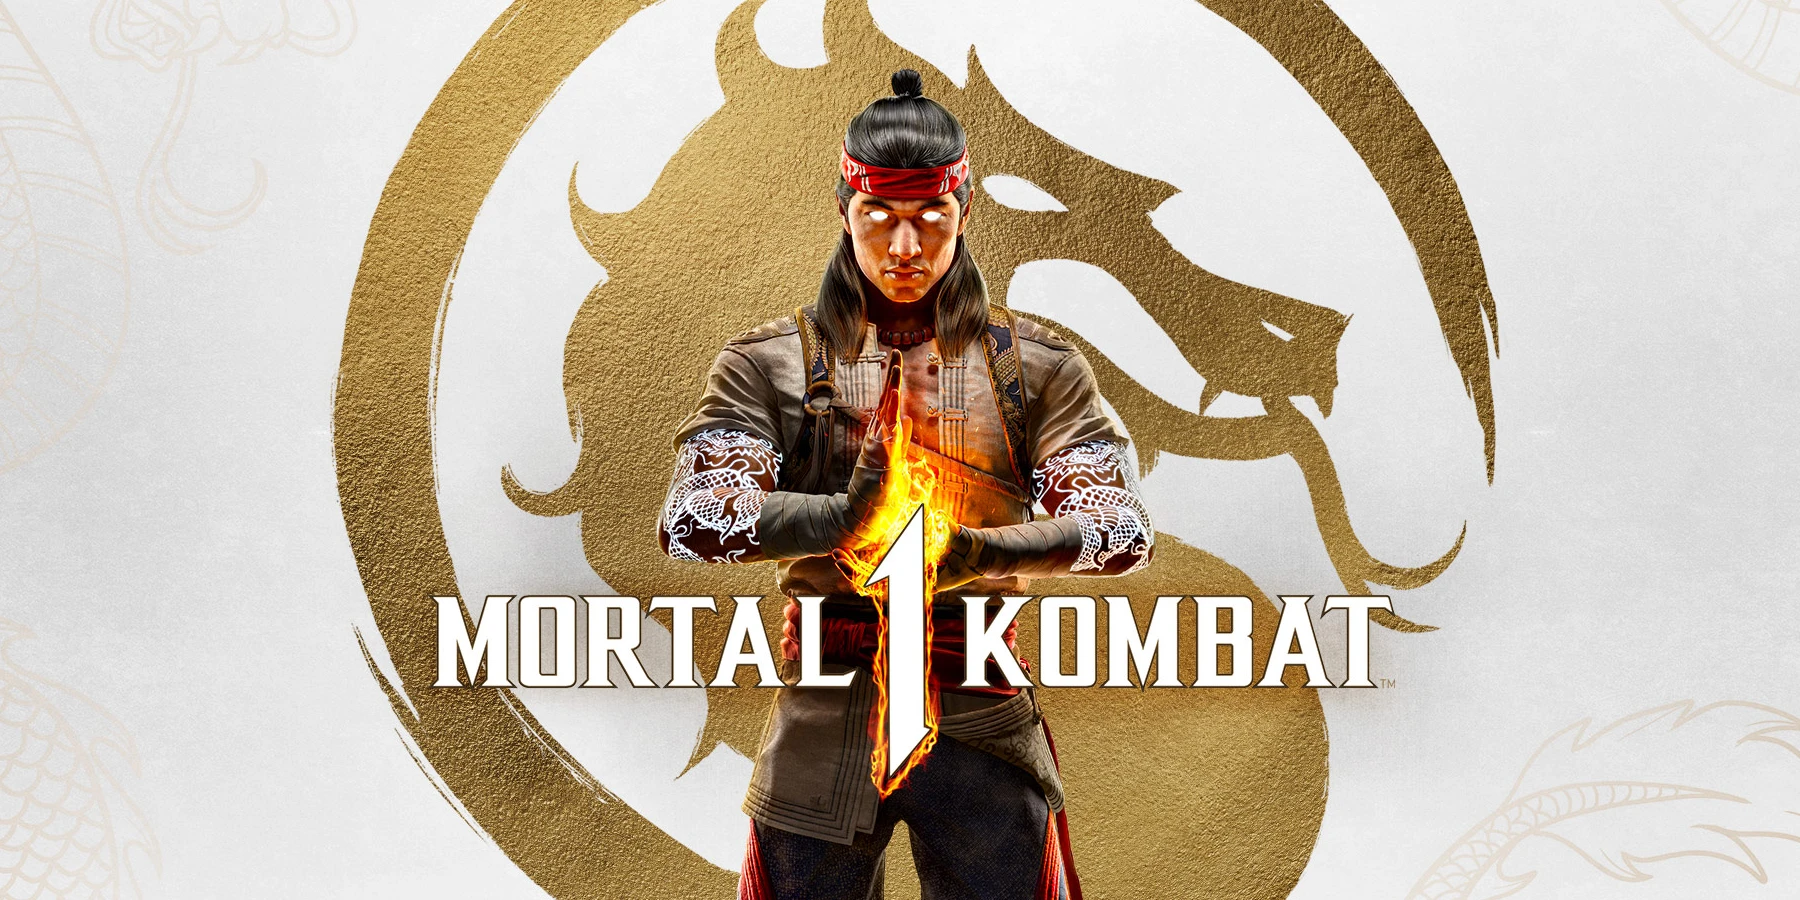 Getting My Butt Kicked In The Mortal Kombat 11 Online Beta (And